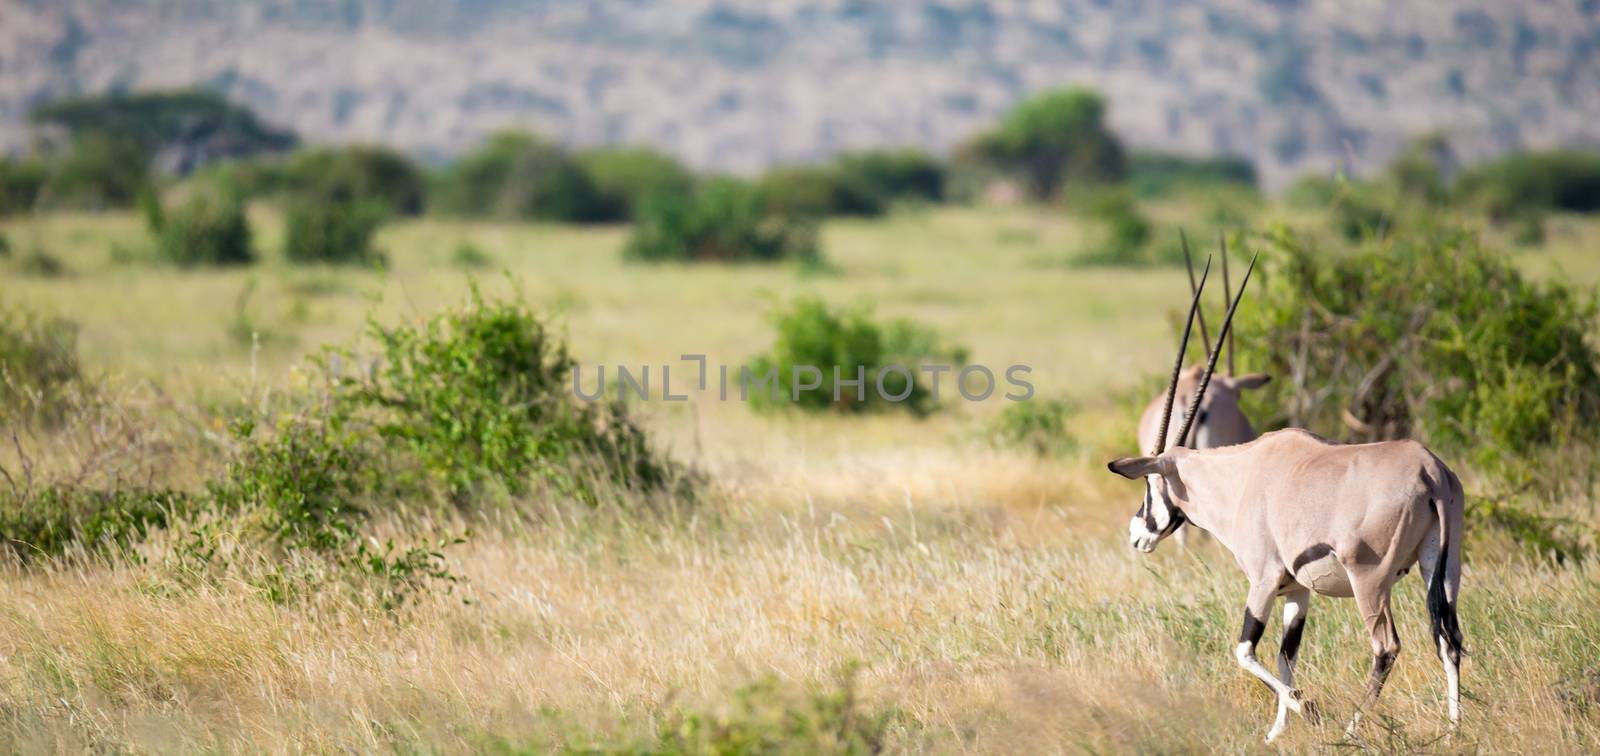 Some antelopes in the grass landscape of Kenya by 25ehaag6